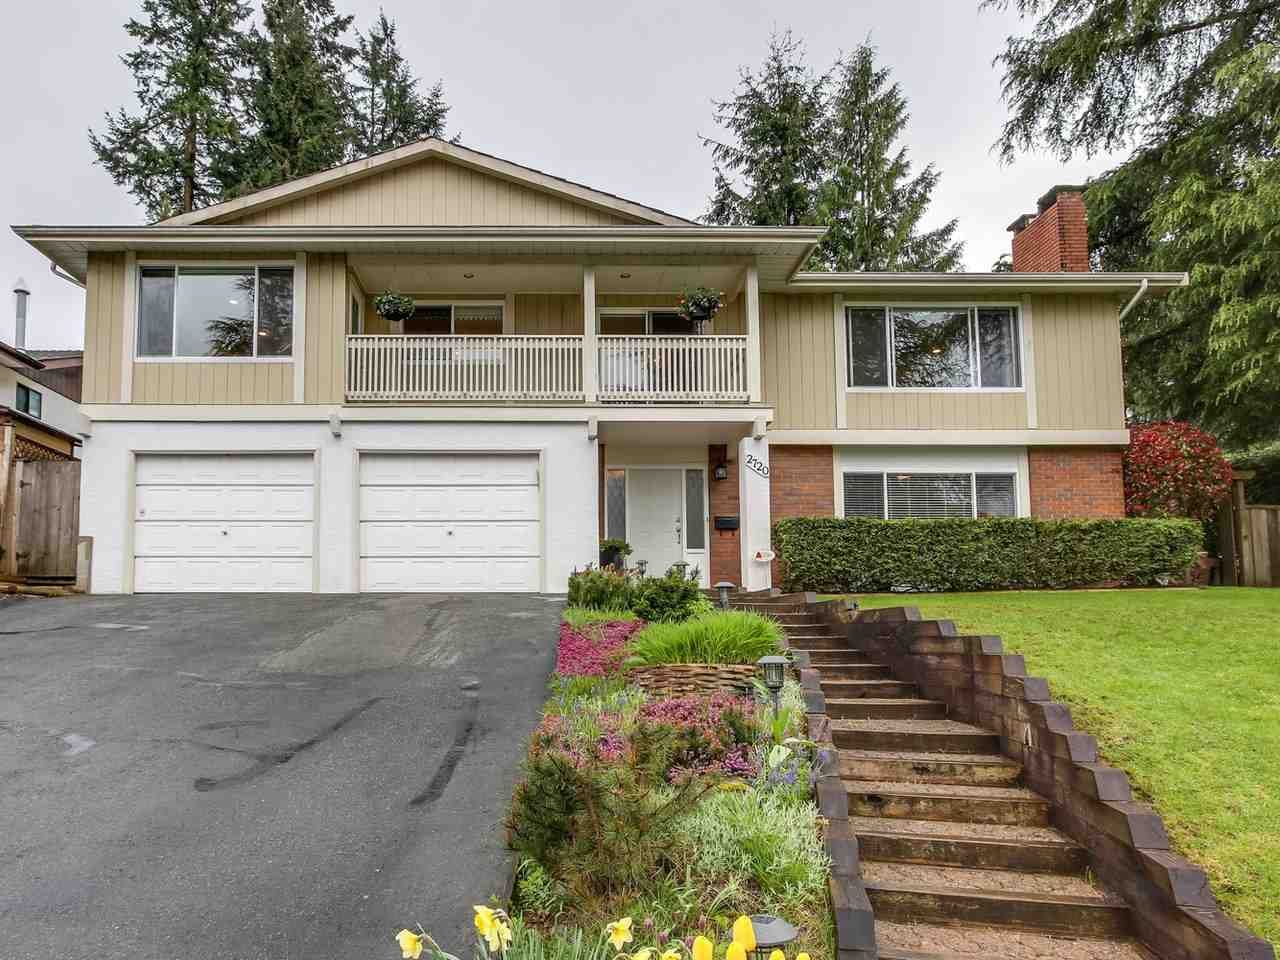 Main Photo: 2720 HAWSER Avenue in Coquitlam: Ranch Park House for sale : MLS®# R2161090